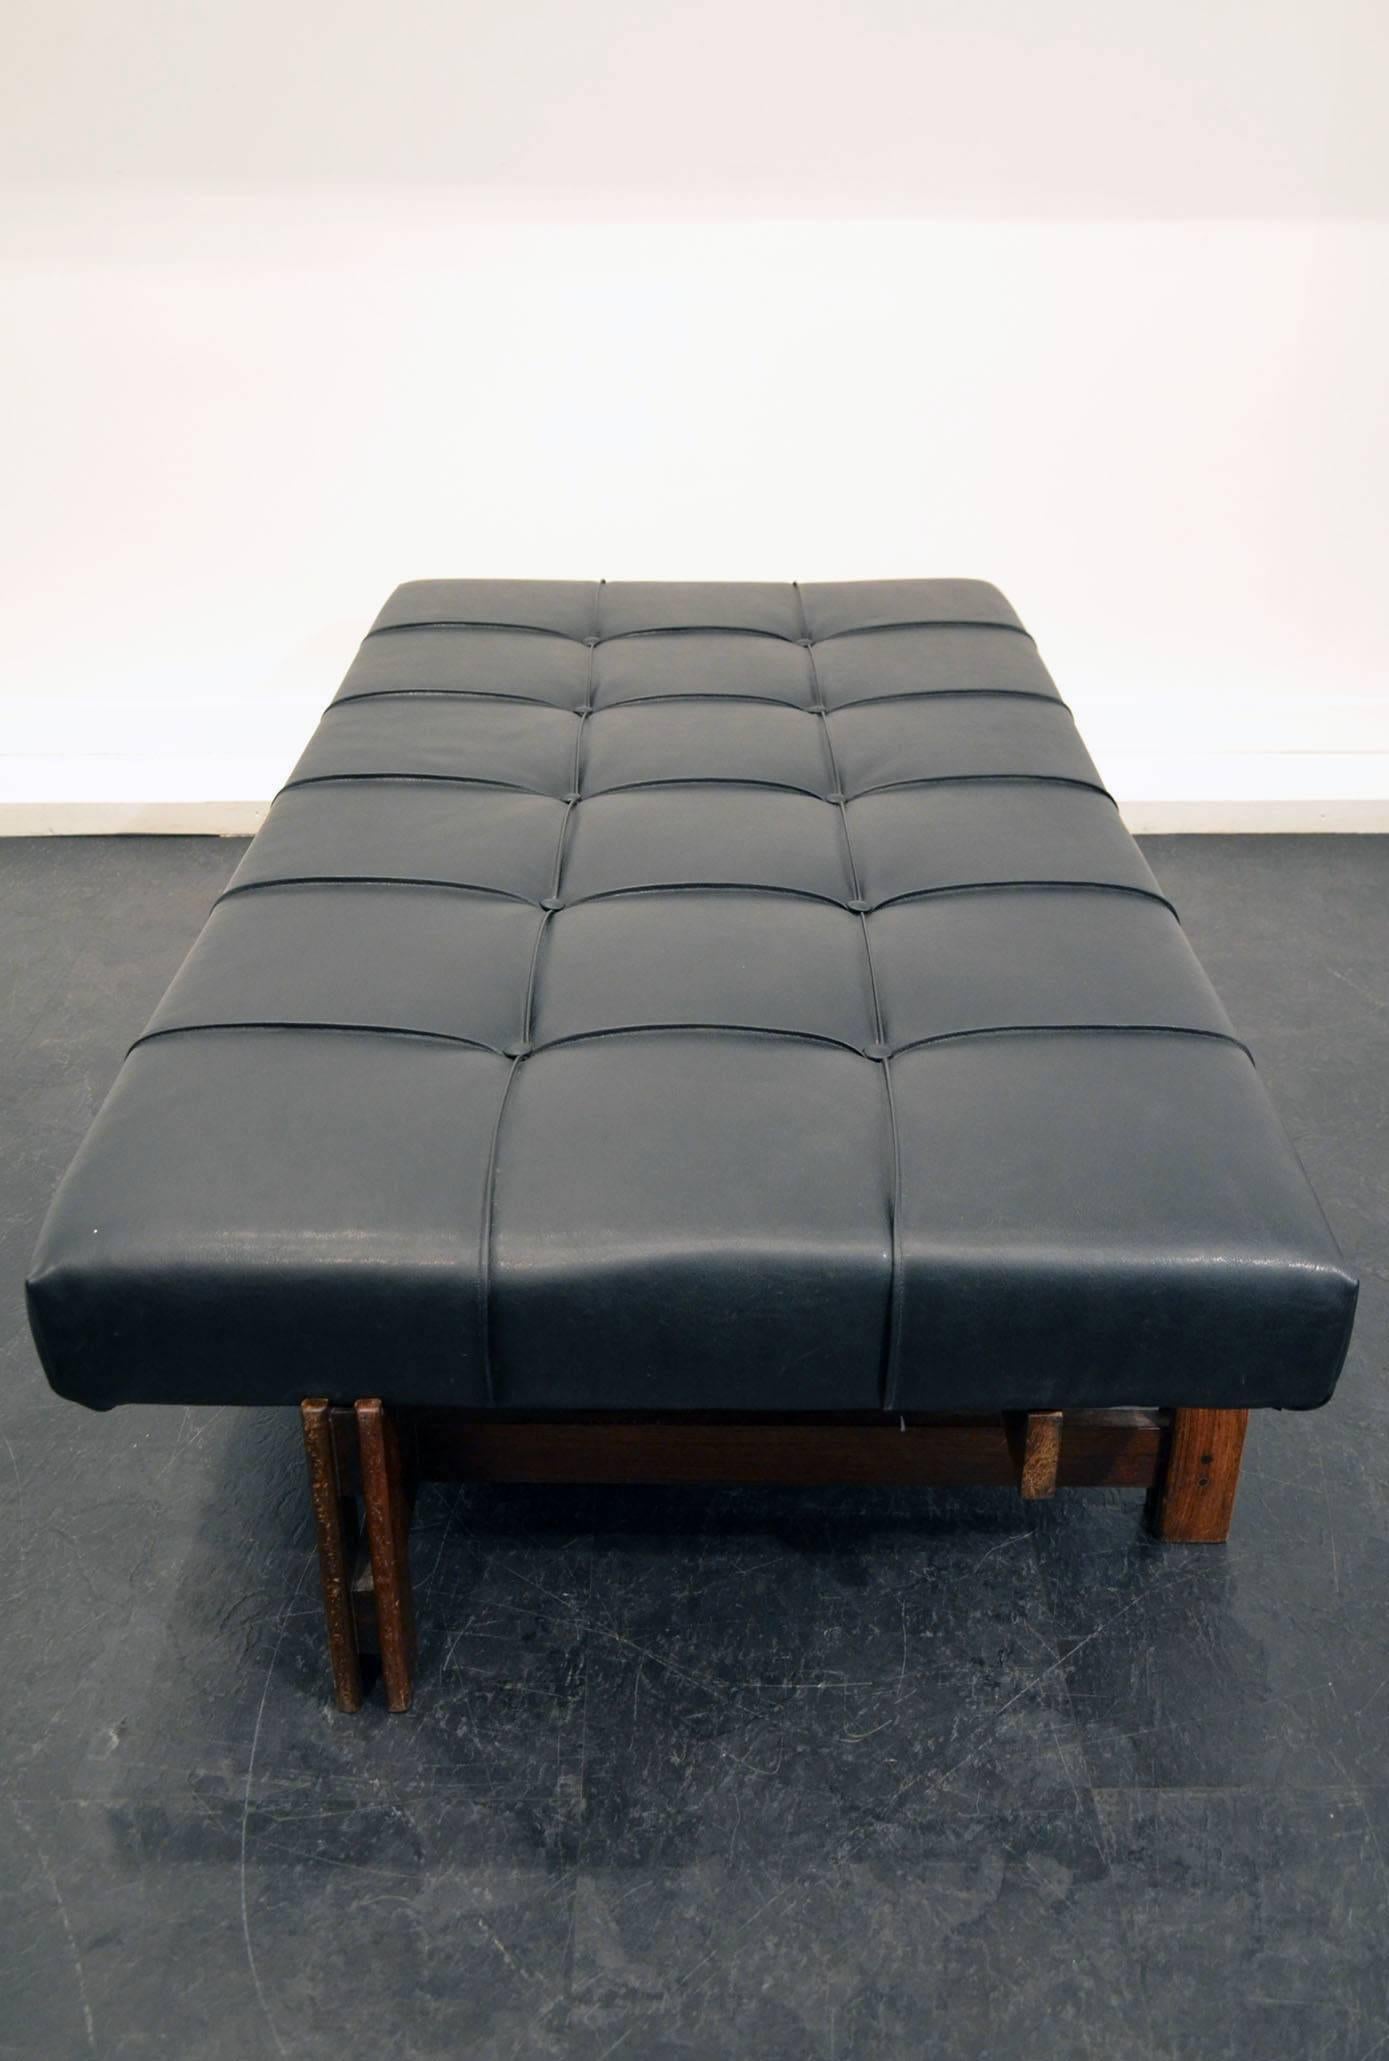 Italian 1960s bench or daybed in the taste of Mies Van Der Rohe.
Wood and leather.